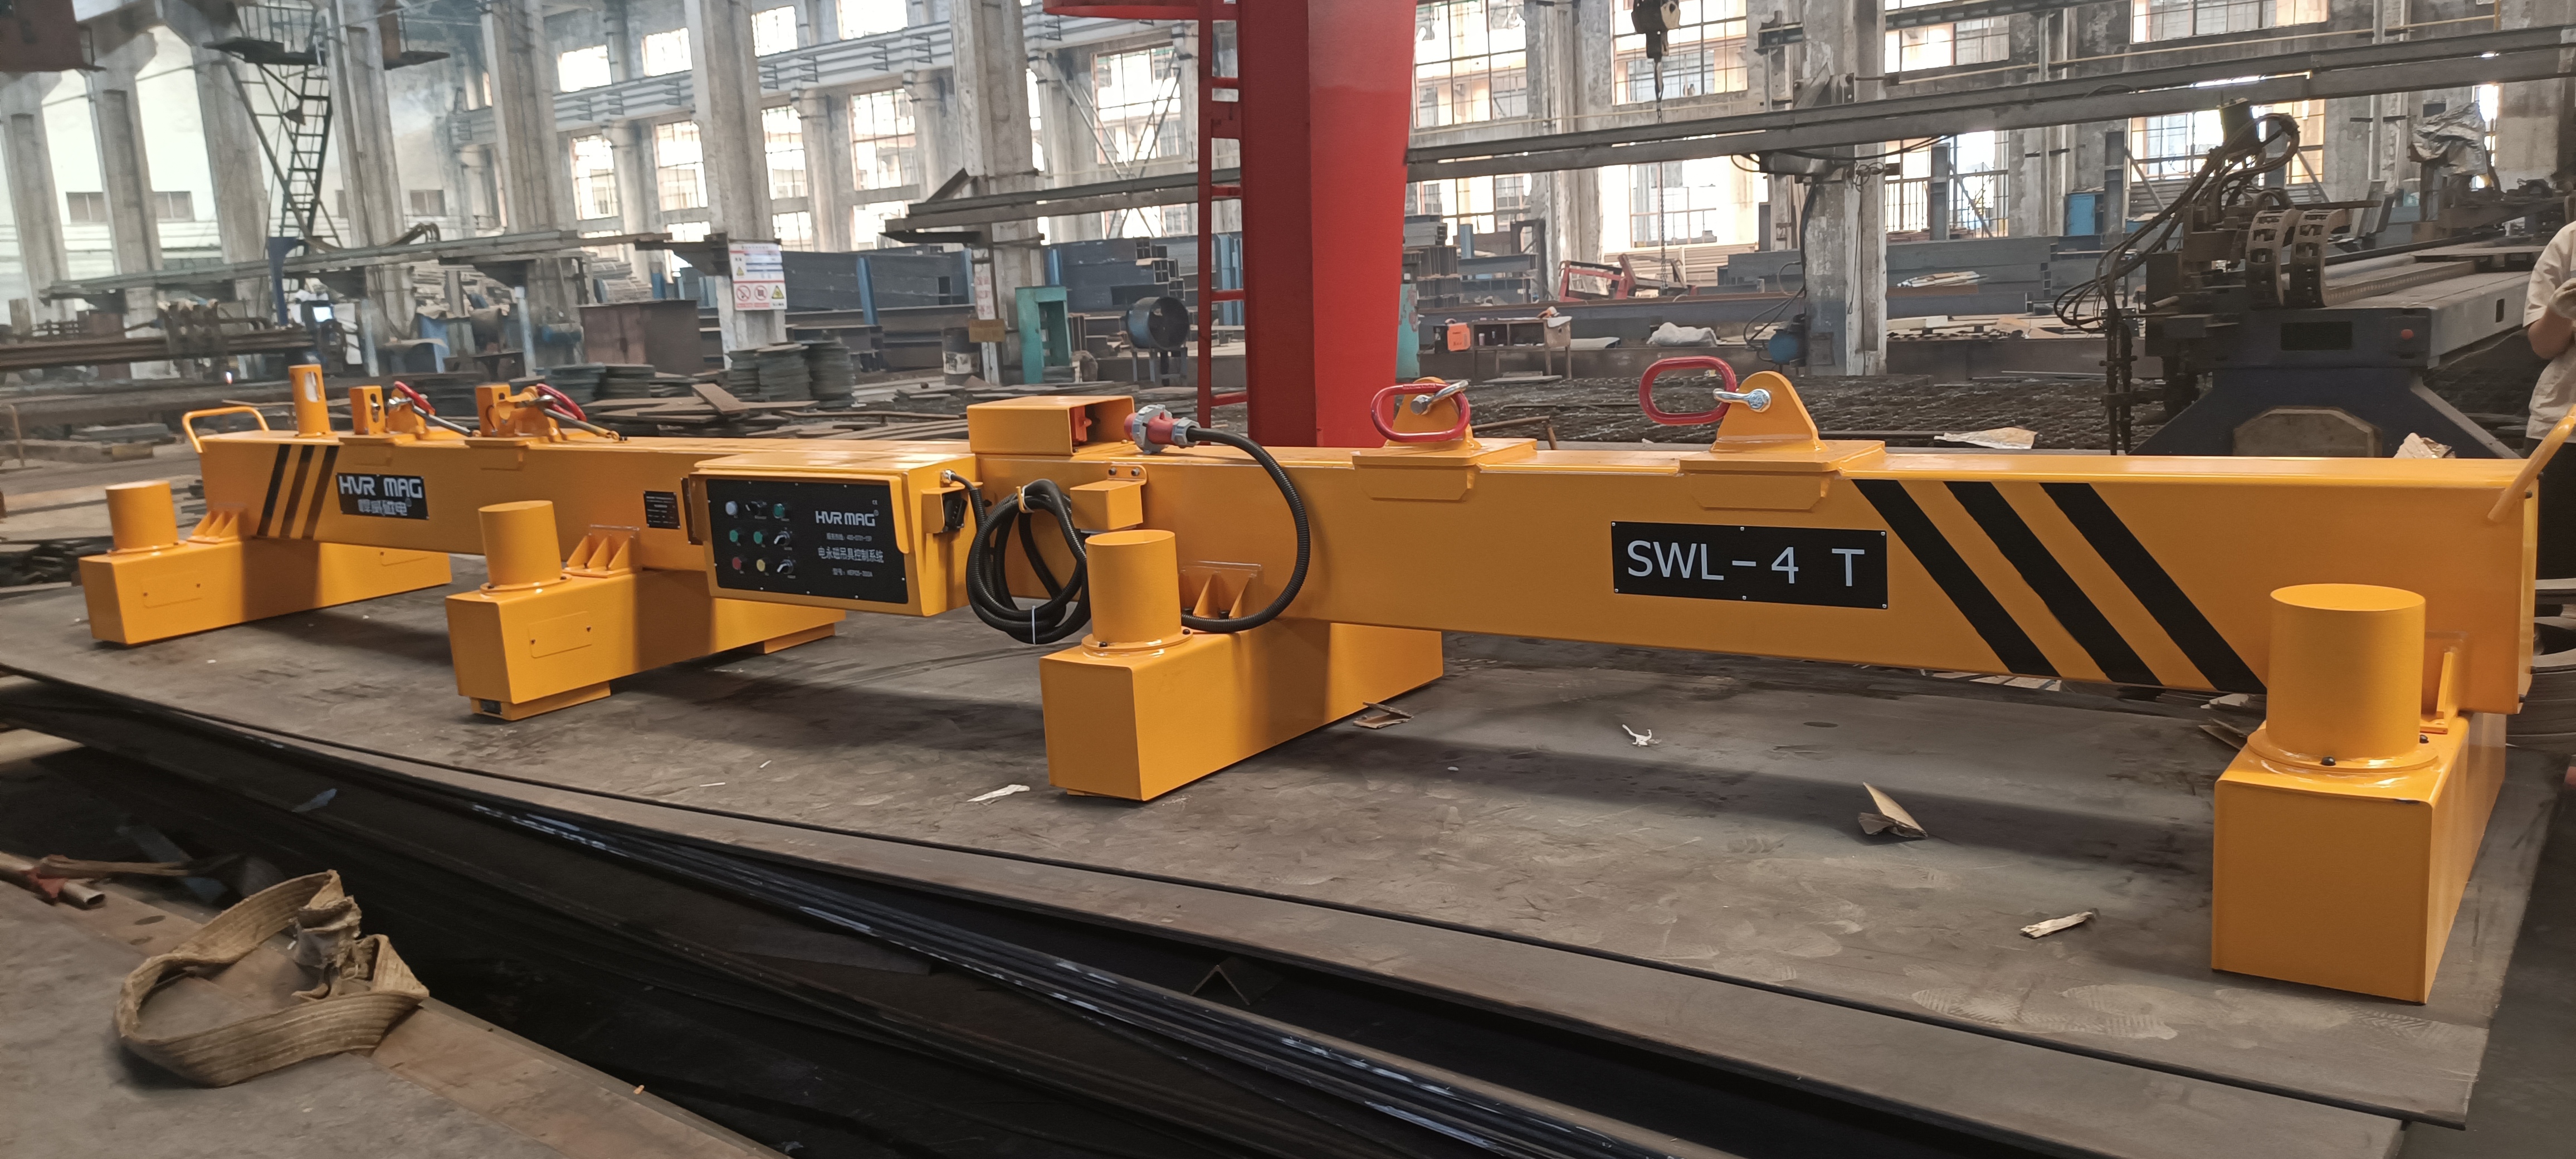 Magnetic lifter sends the steel plates into the cutting machine for processing